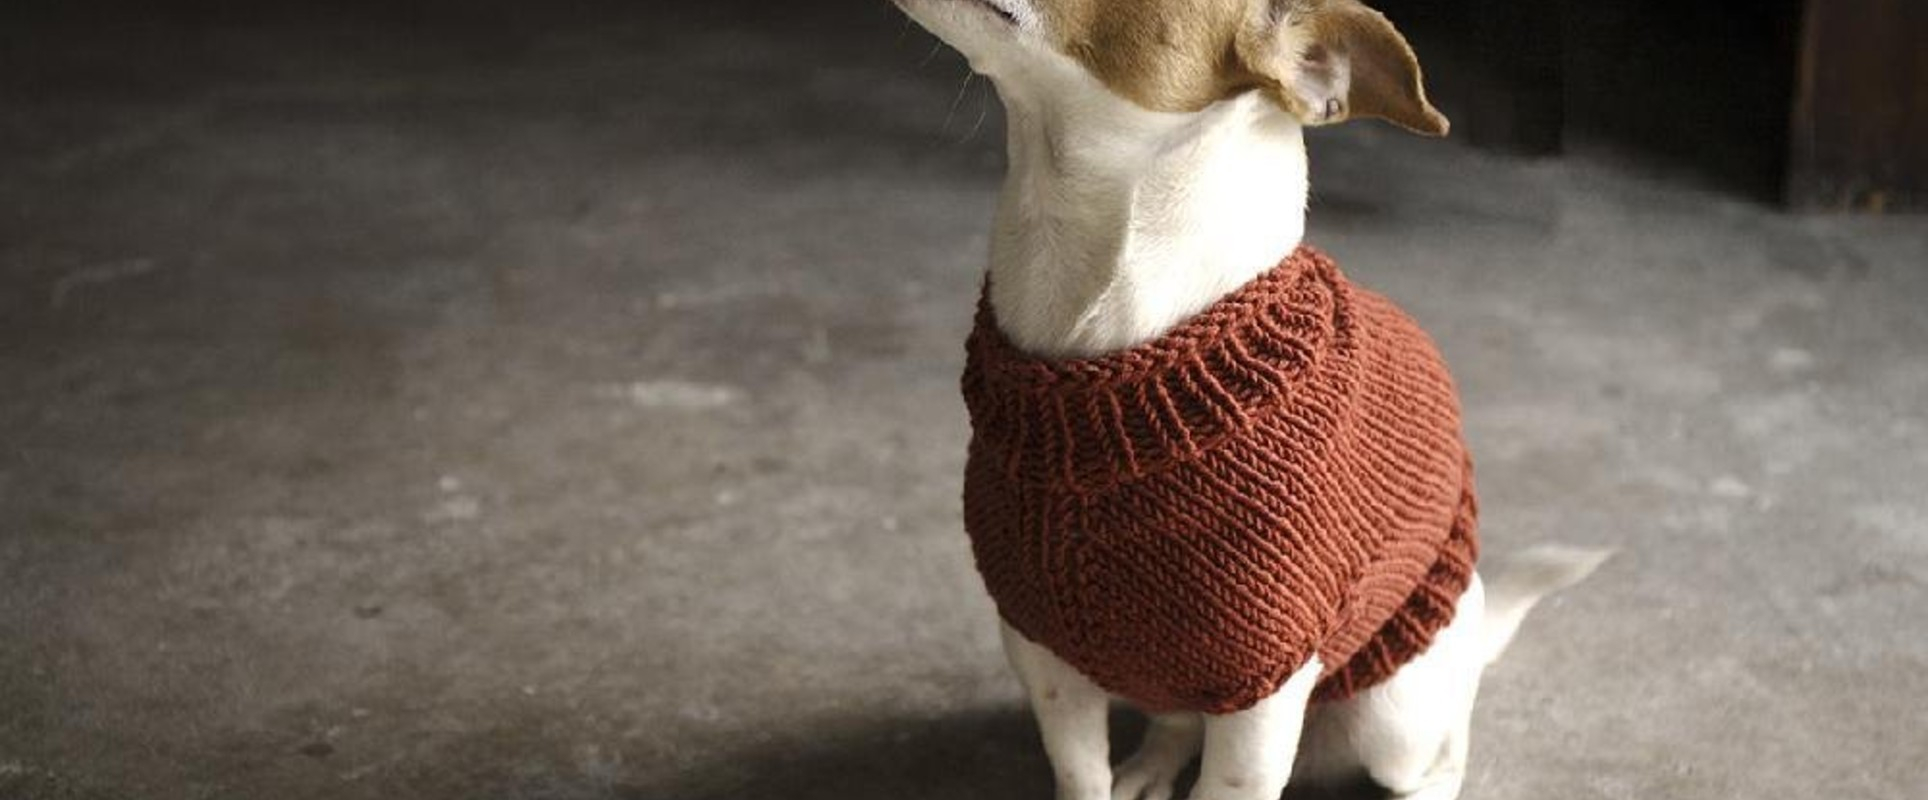 Easy Knitting Pattern For Dog Coat Top 5 Free Dog Sweater Knitting Patterns Lovecrafts